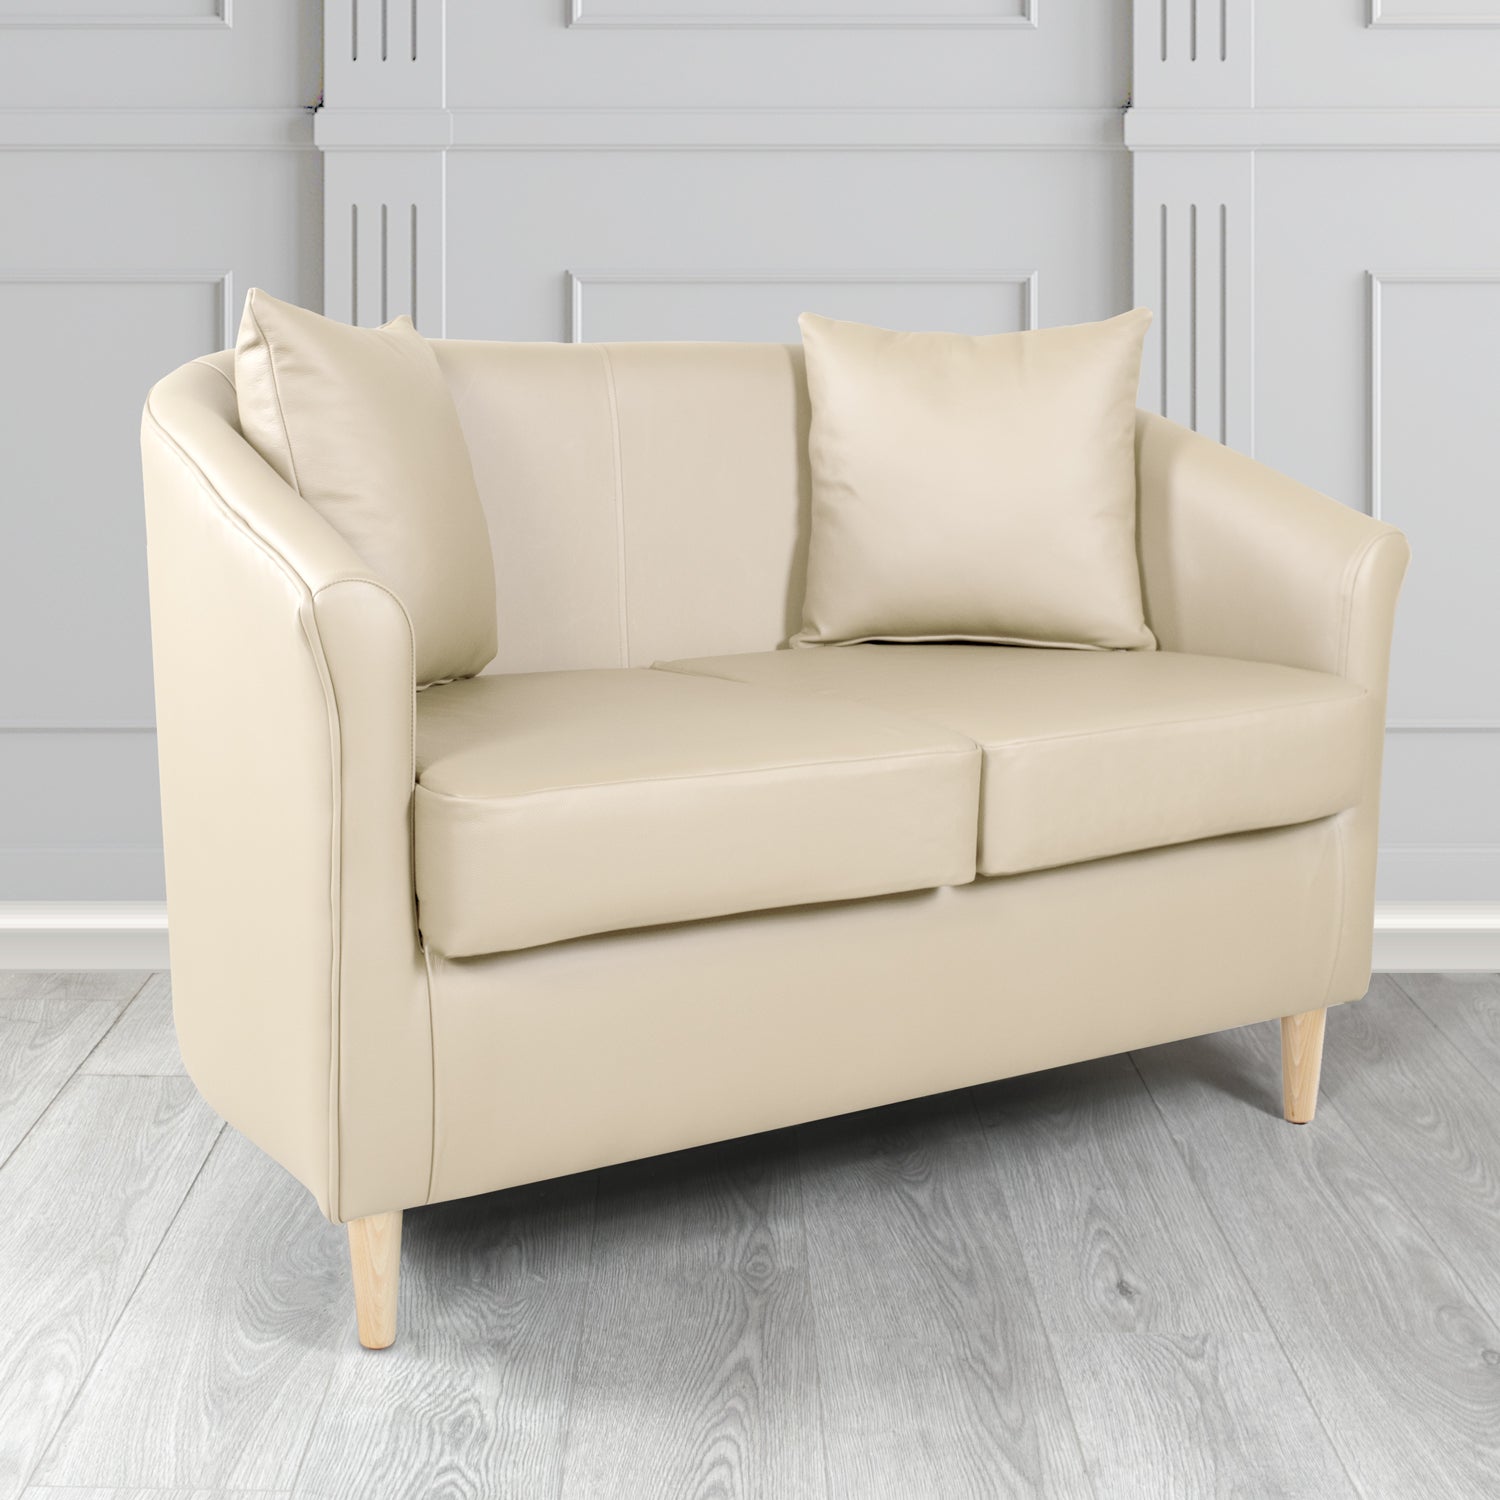 St Tropez Shelly Almond Crib 5 Genuine Leather 2 Seater Tub Sofa with Scatter Cushions - The Tub Chair Shop